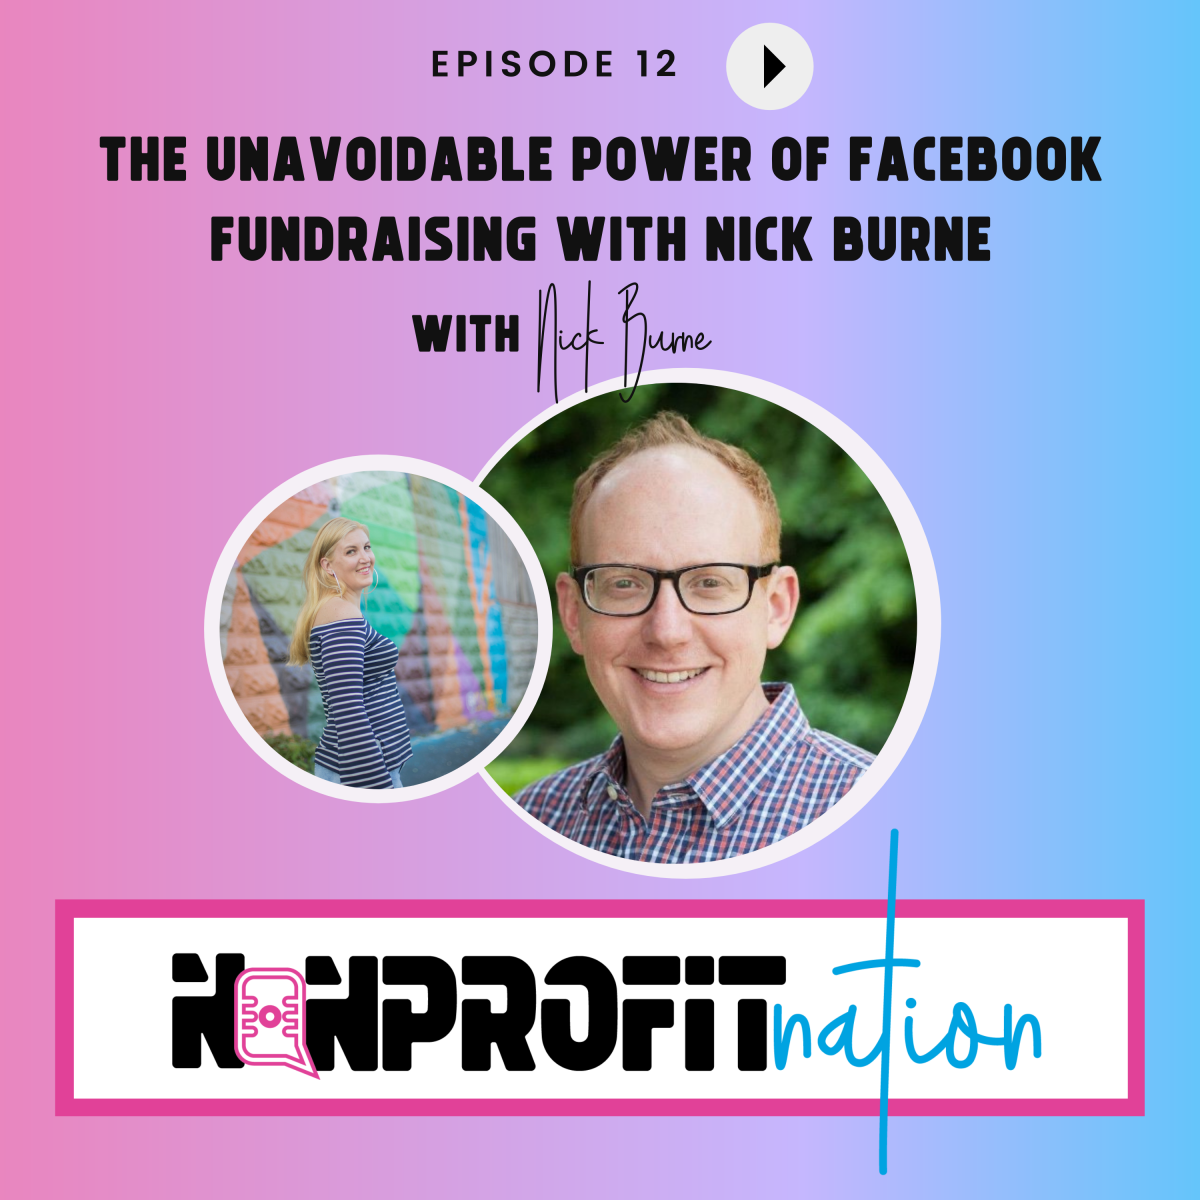 The Unavoidable Power of Facebook Fundraising with Nick Burne